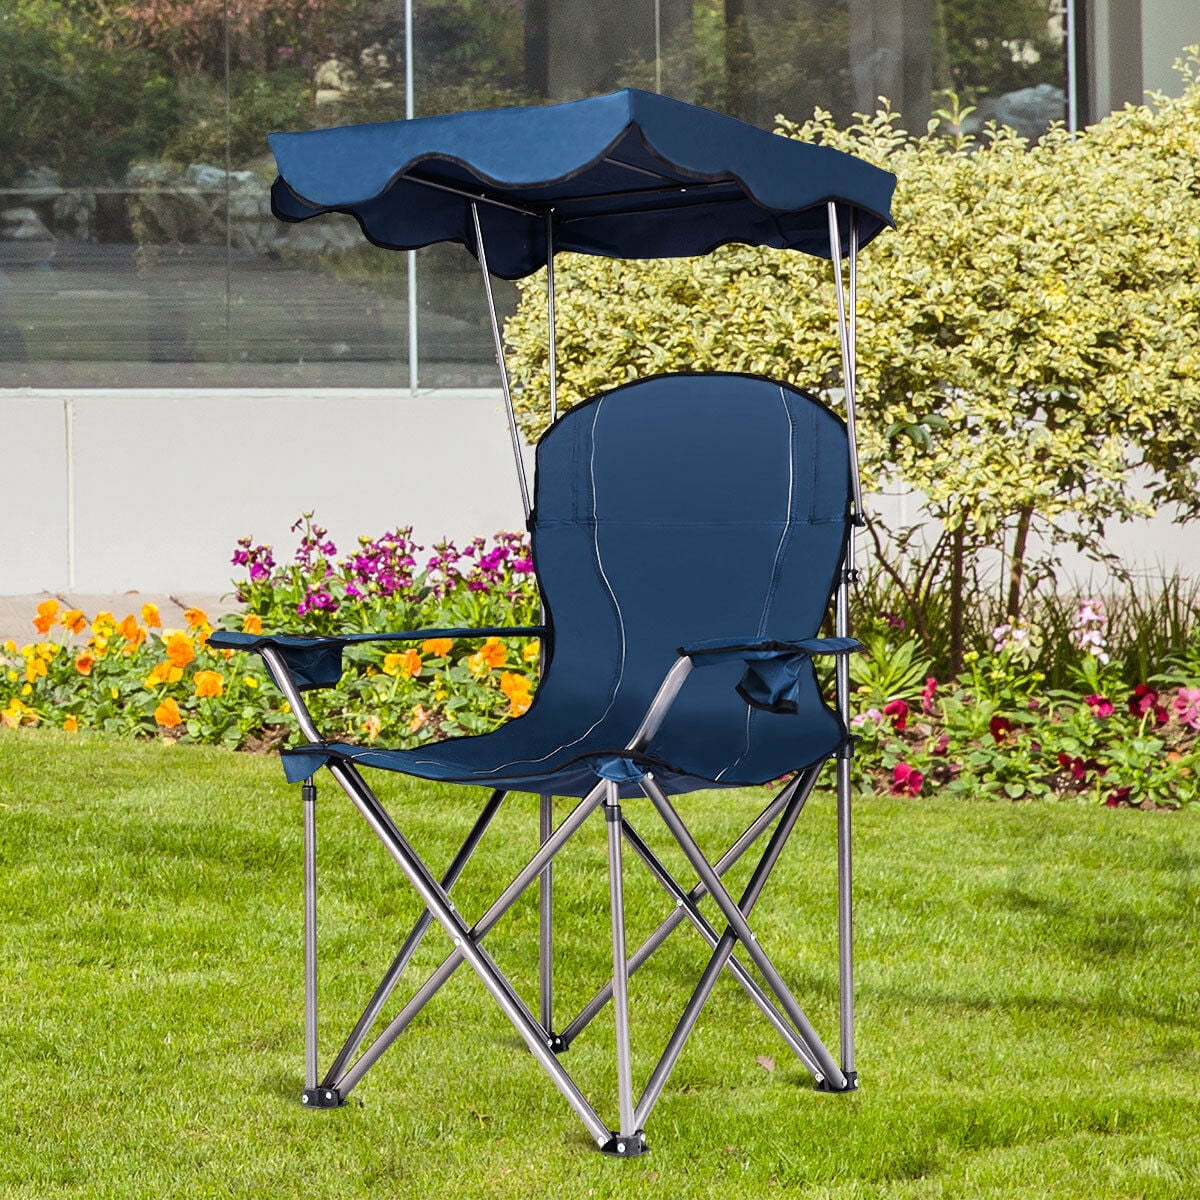 Costway Portable Folding Beach Canopy Chair W/ Cup Holders Bag Camping  Hiking Outdoor Blue